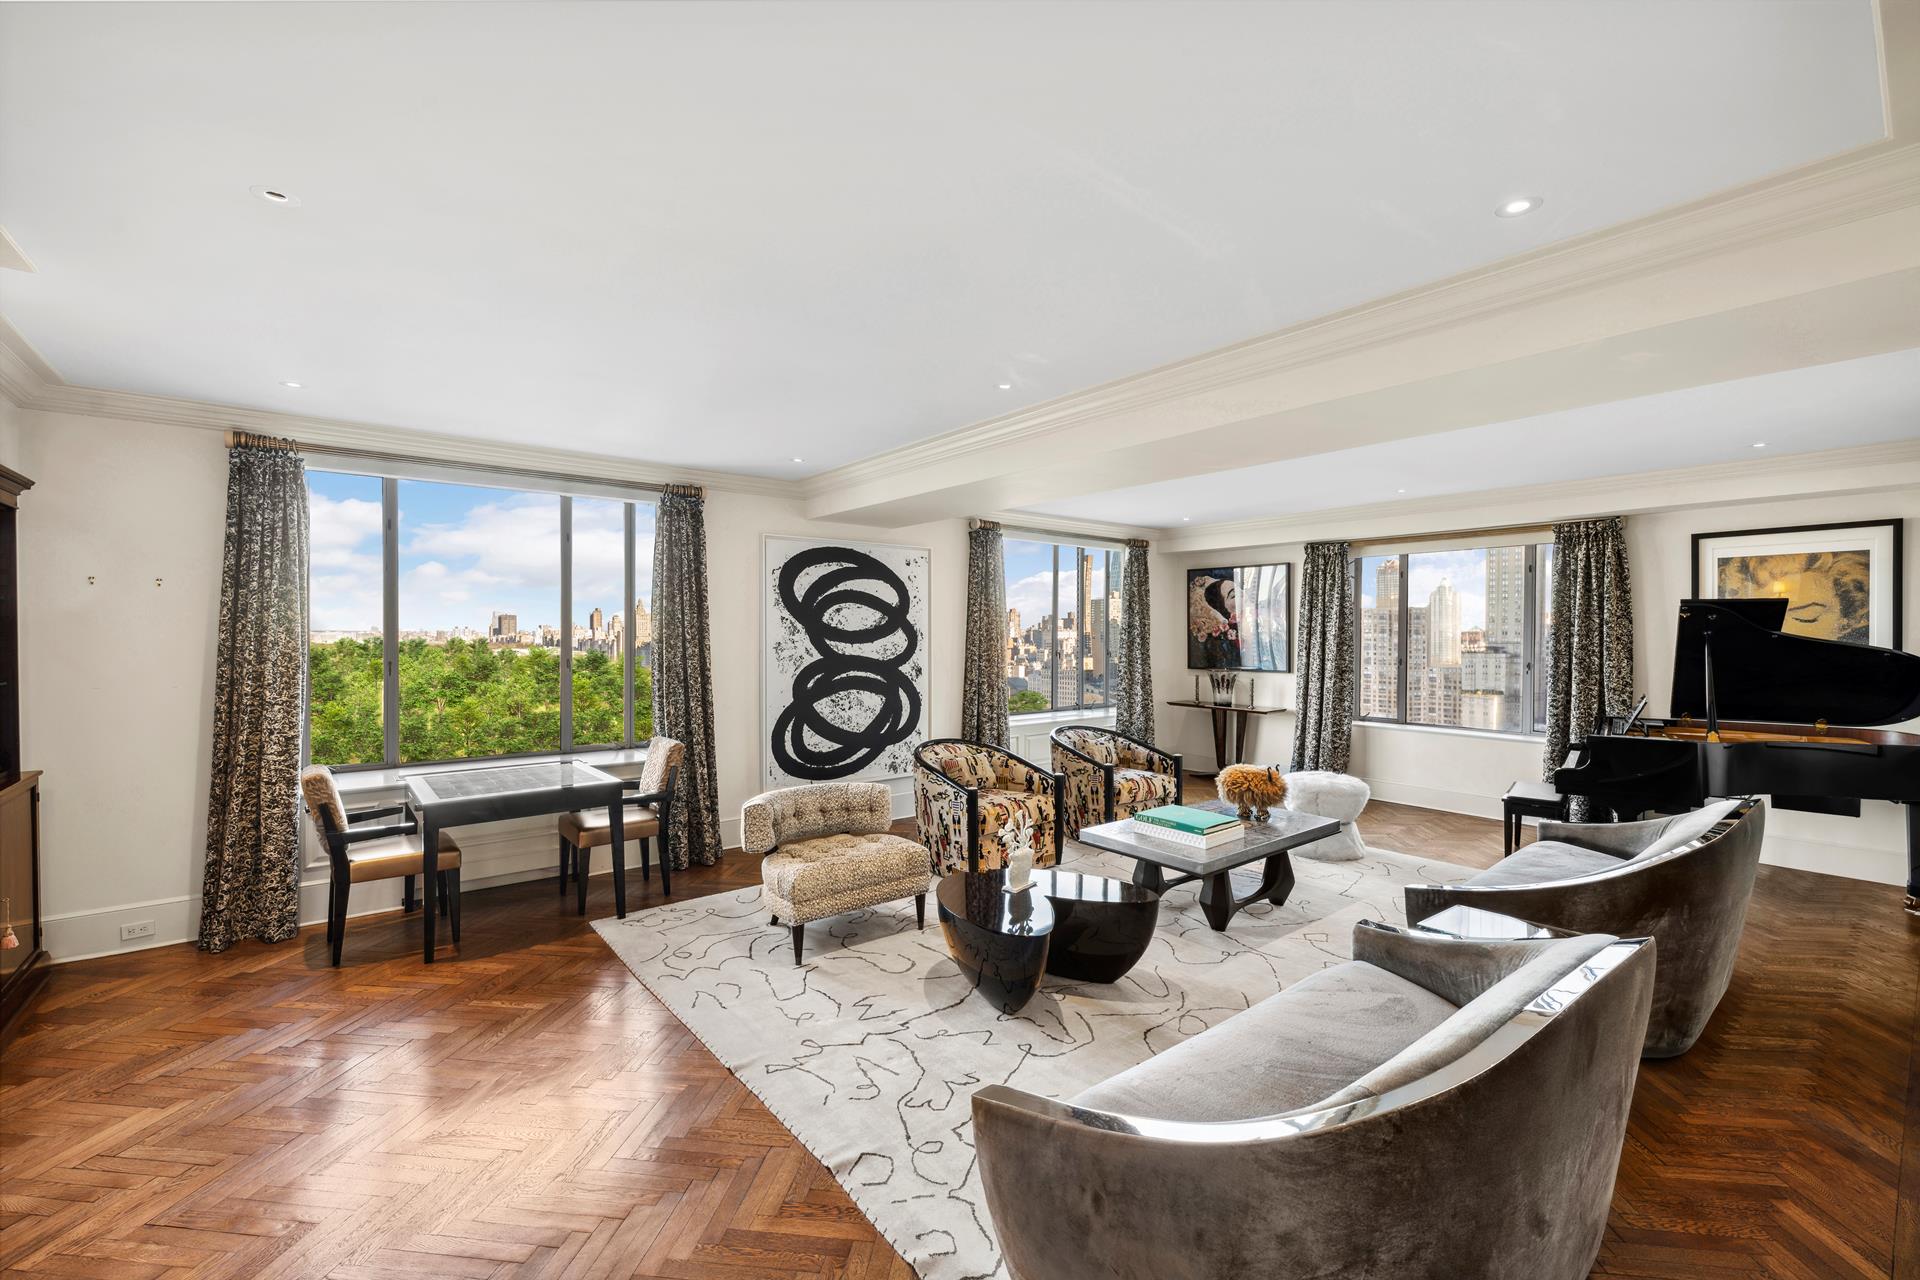 150 Central Park 2401, Central Park South, Midtown West, NYC - 3 Bedrooms  
2.5 Bathrooms  
8 Rooms - 